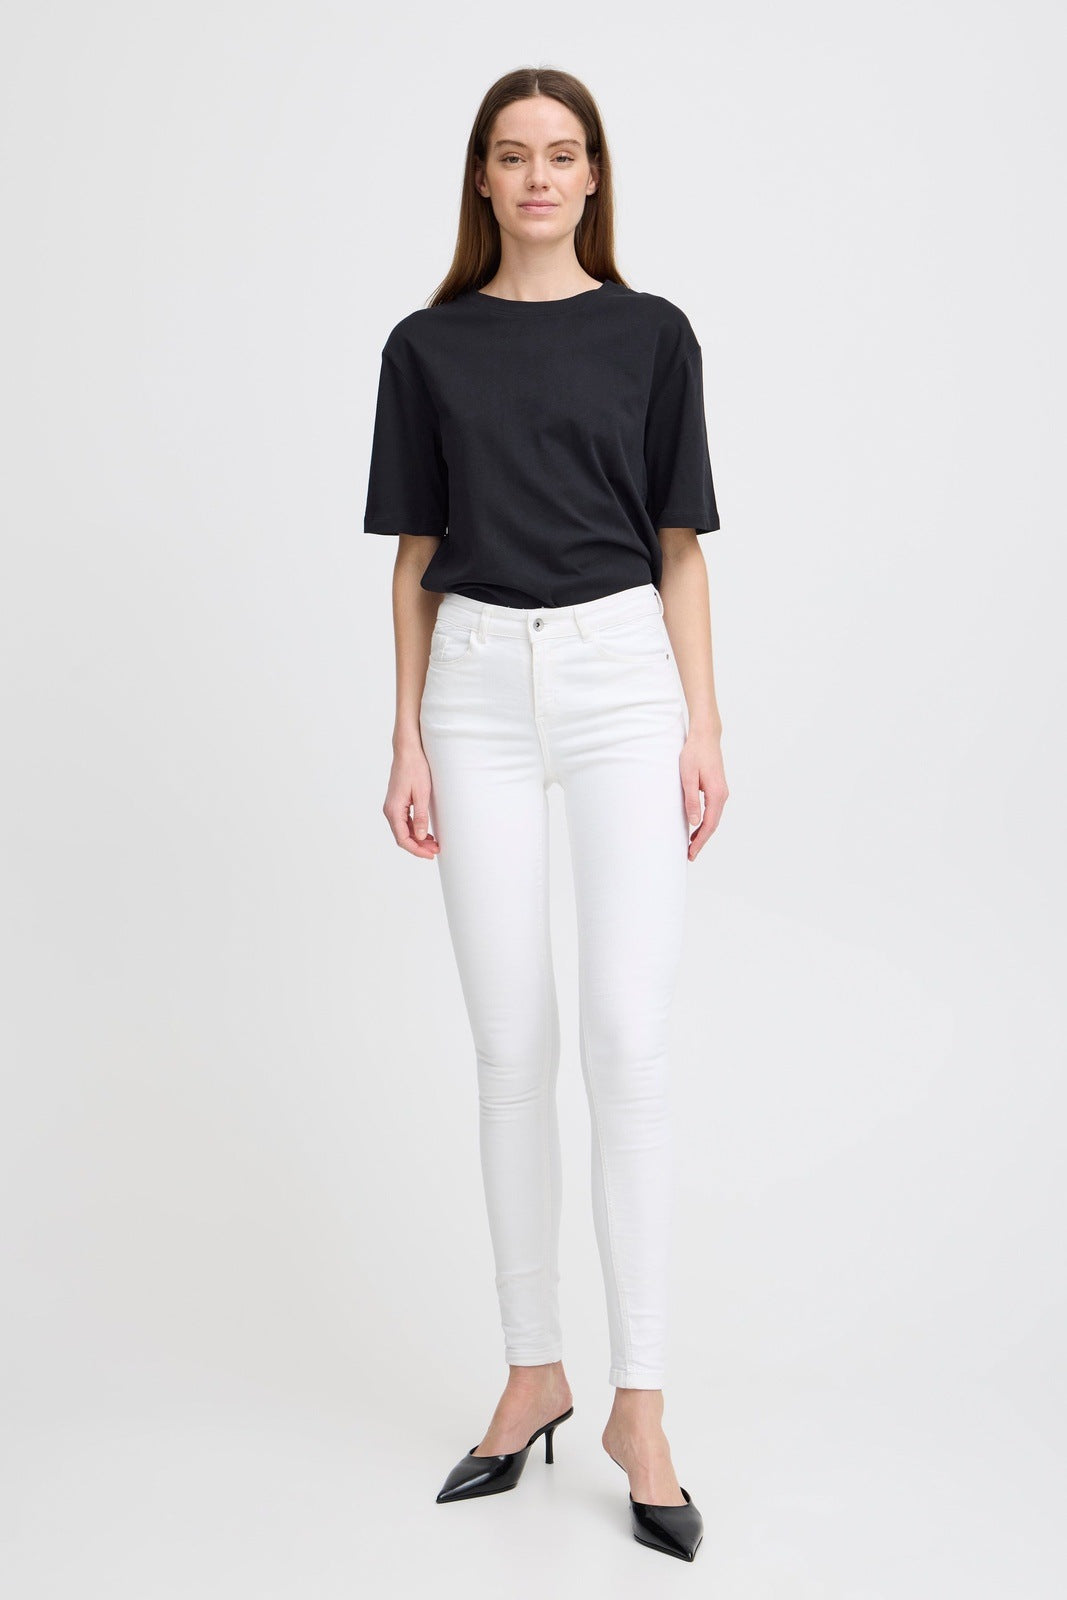 B.young Denim Jeans - White 1 Shaws Department Stores